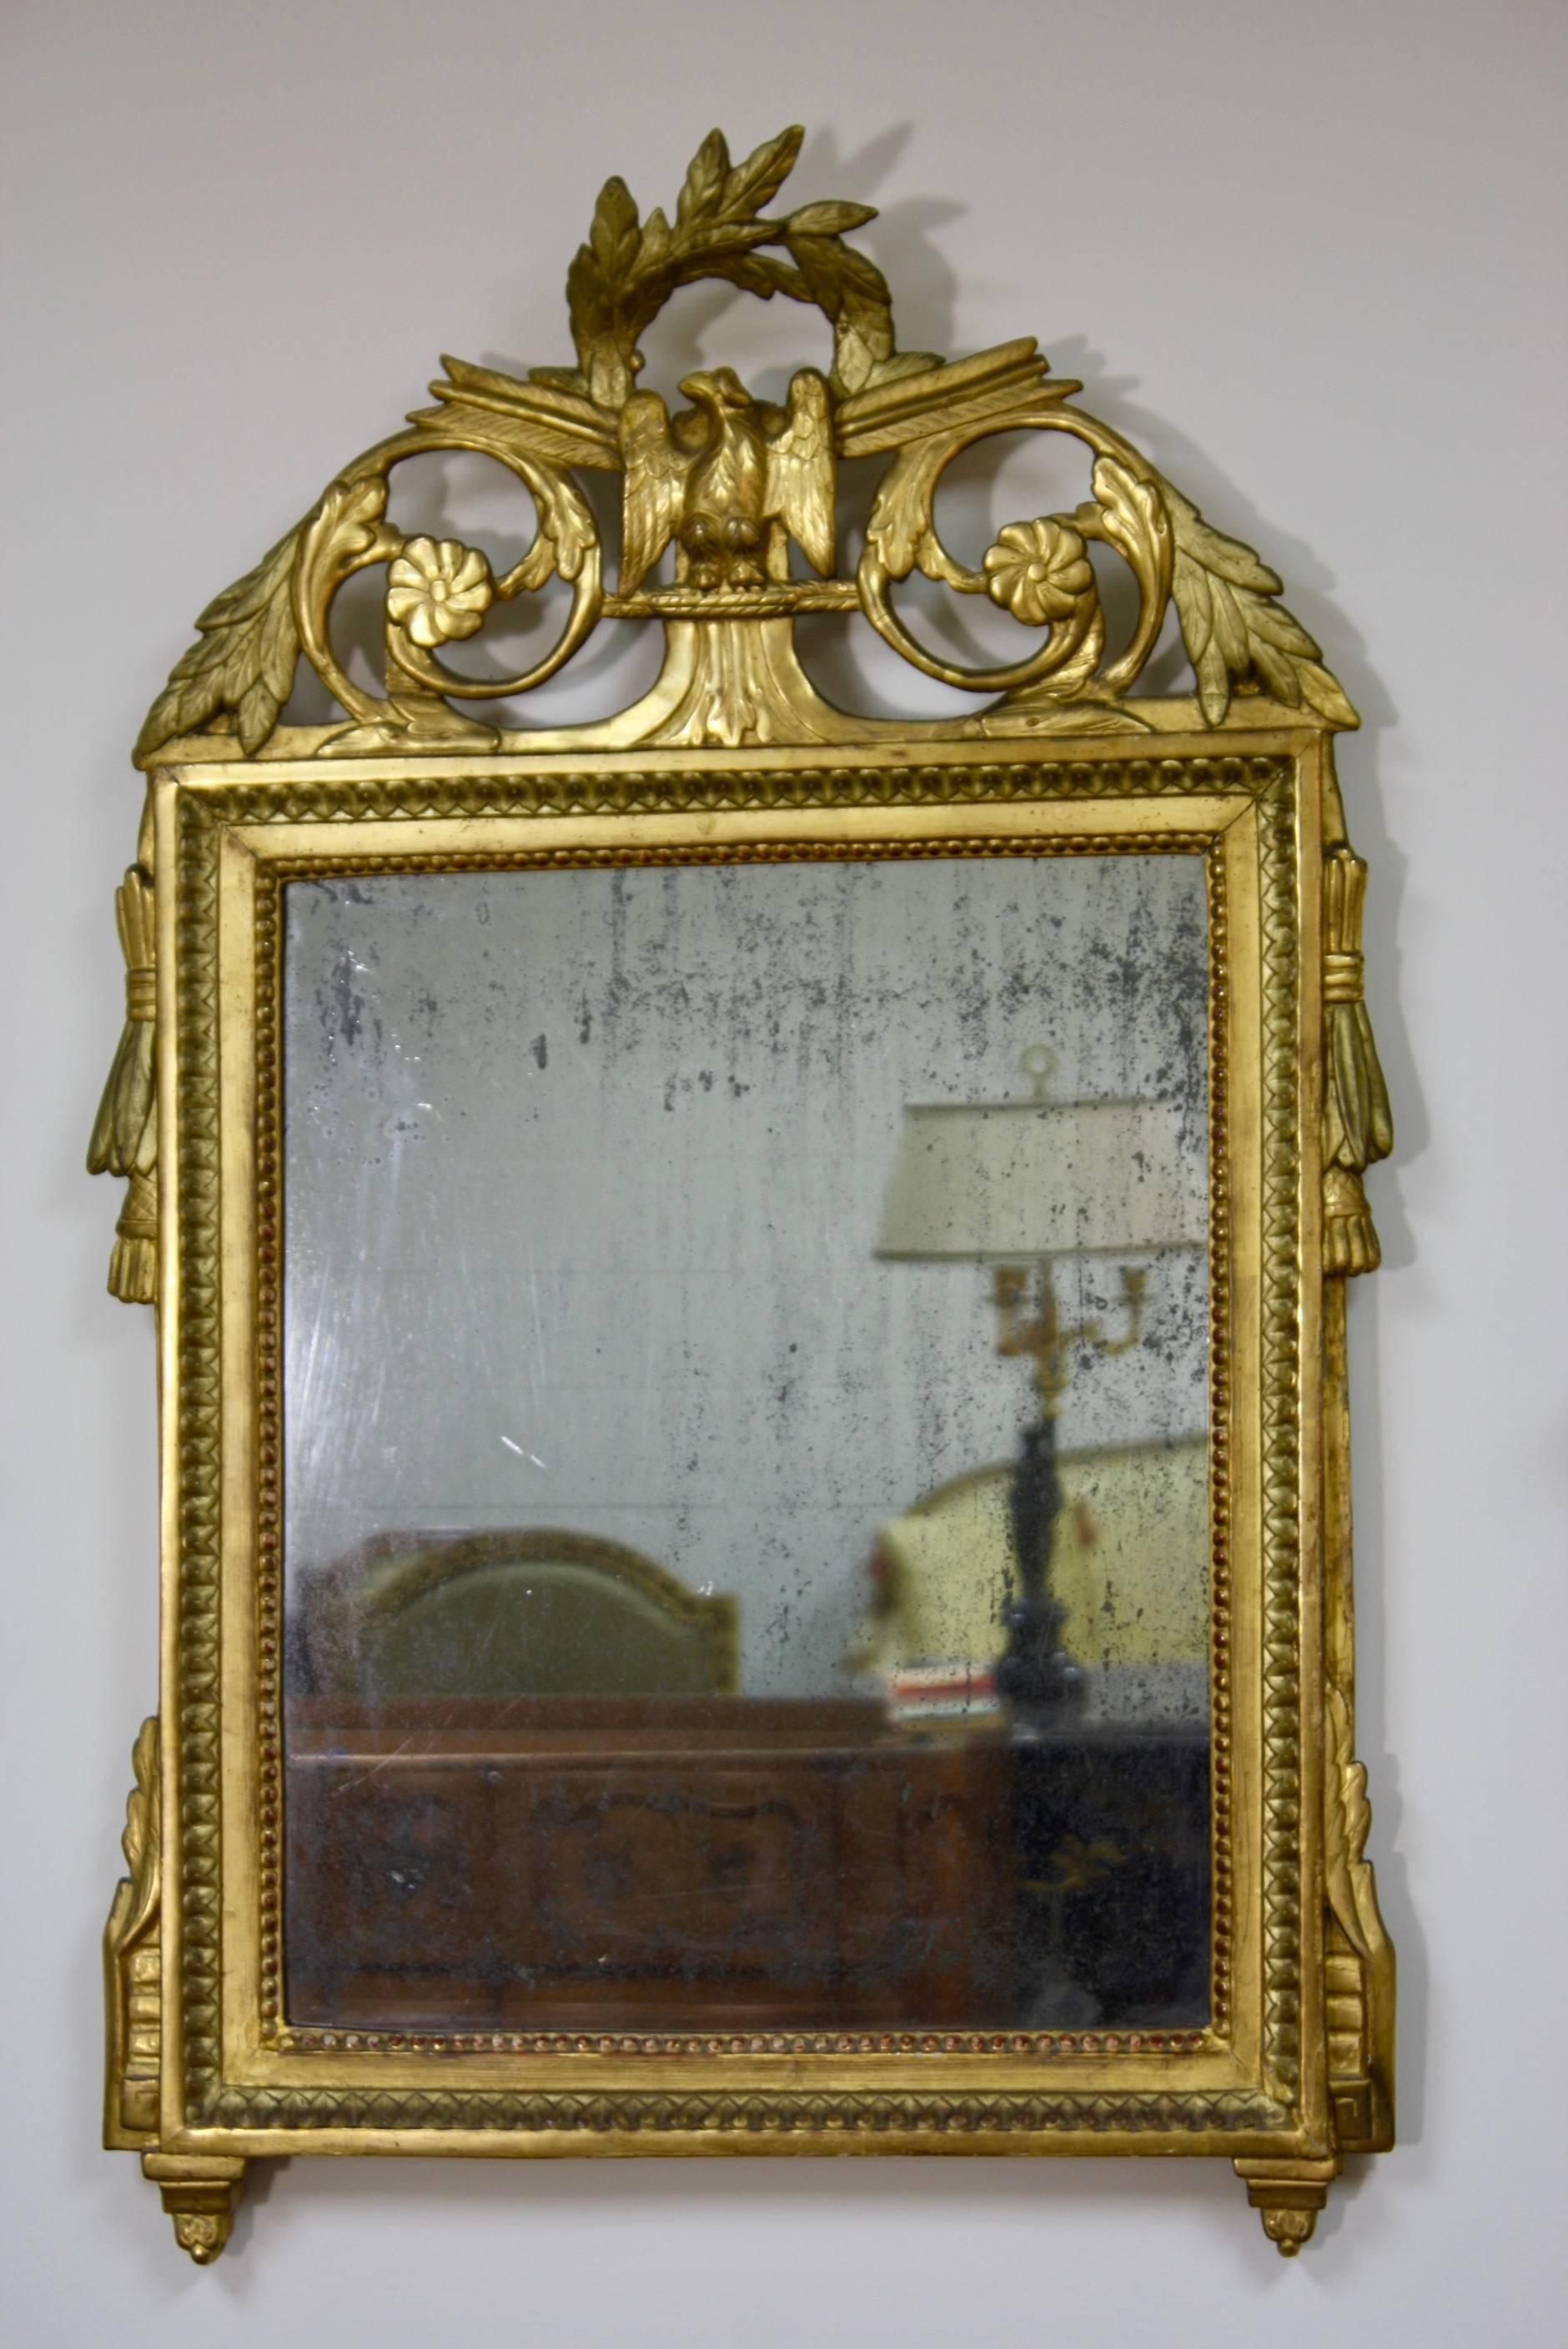 A fine quality Louis XVI period French giltwood trumeau mirror, circa 1780, with neoclassical detailing, including laurel wreath and eagle on the cartouche, original mercury glass and wooden back.